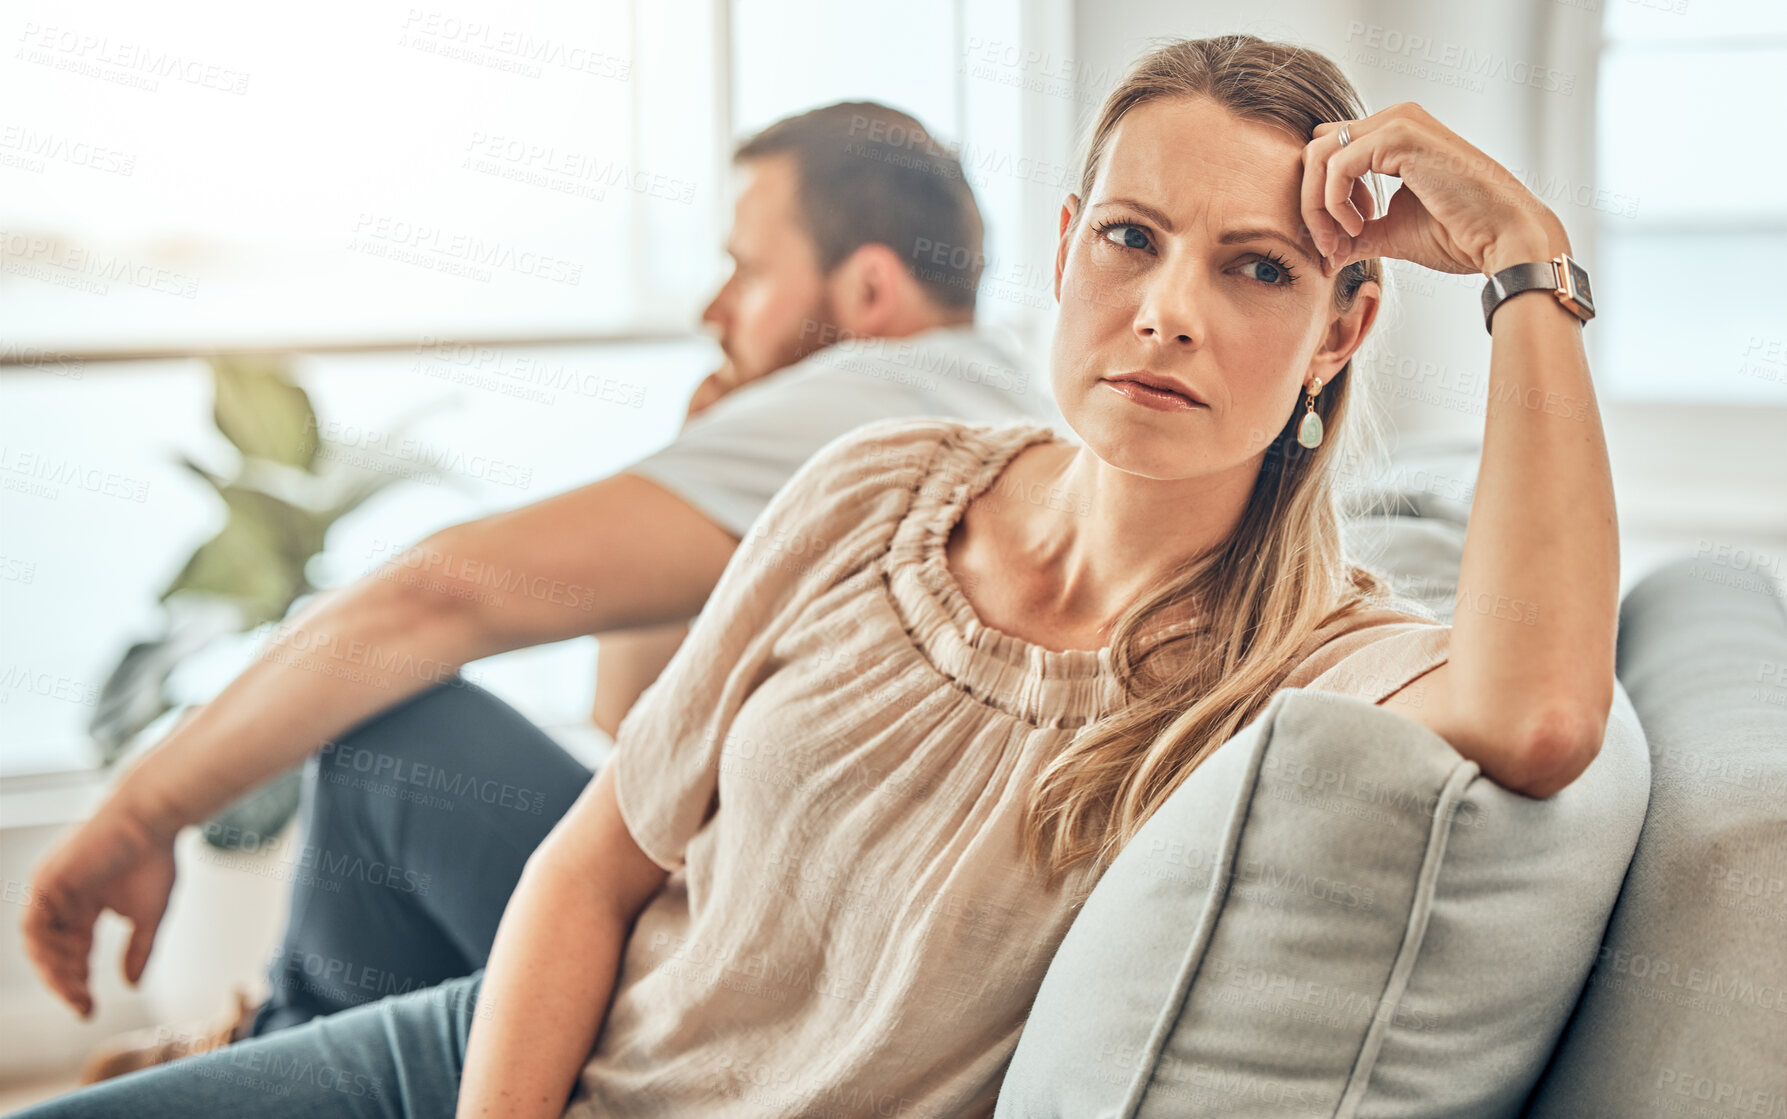 Buy stock photo One young woman feeling frustrated and annoyed after an argument with her husband. A wife feeling distant after fighting due to marriage problems. A negative situation that could end up in divorce